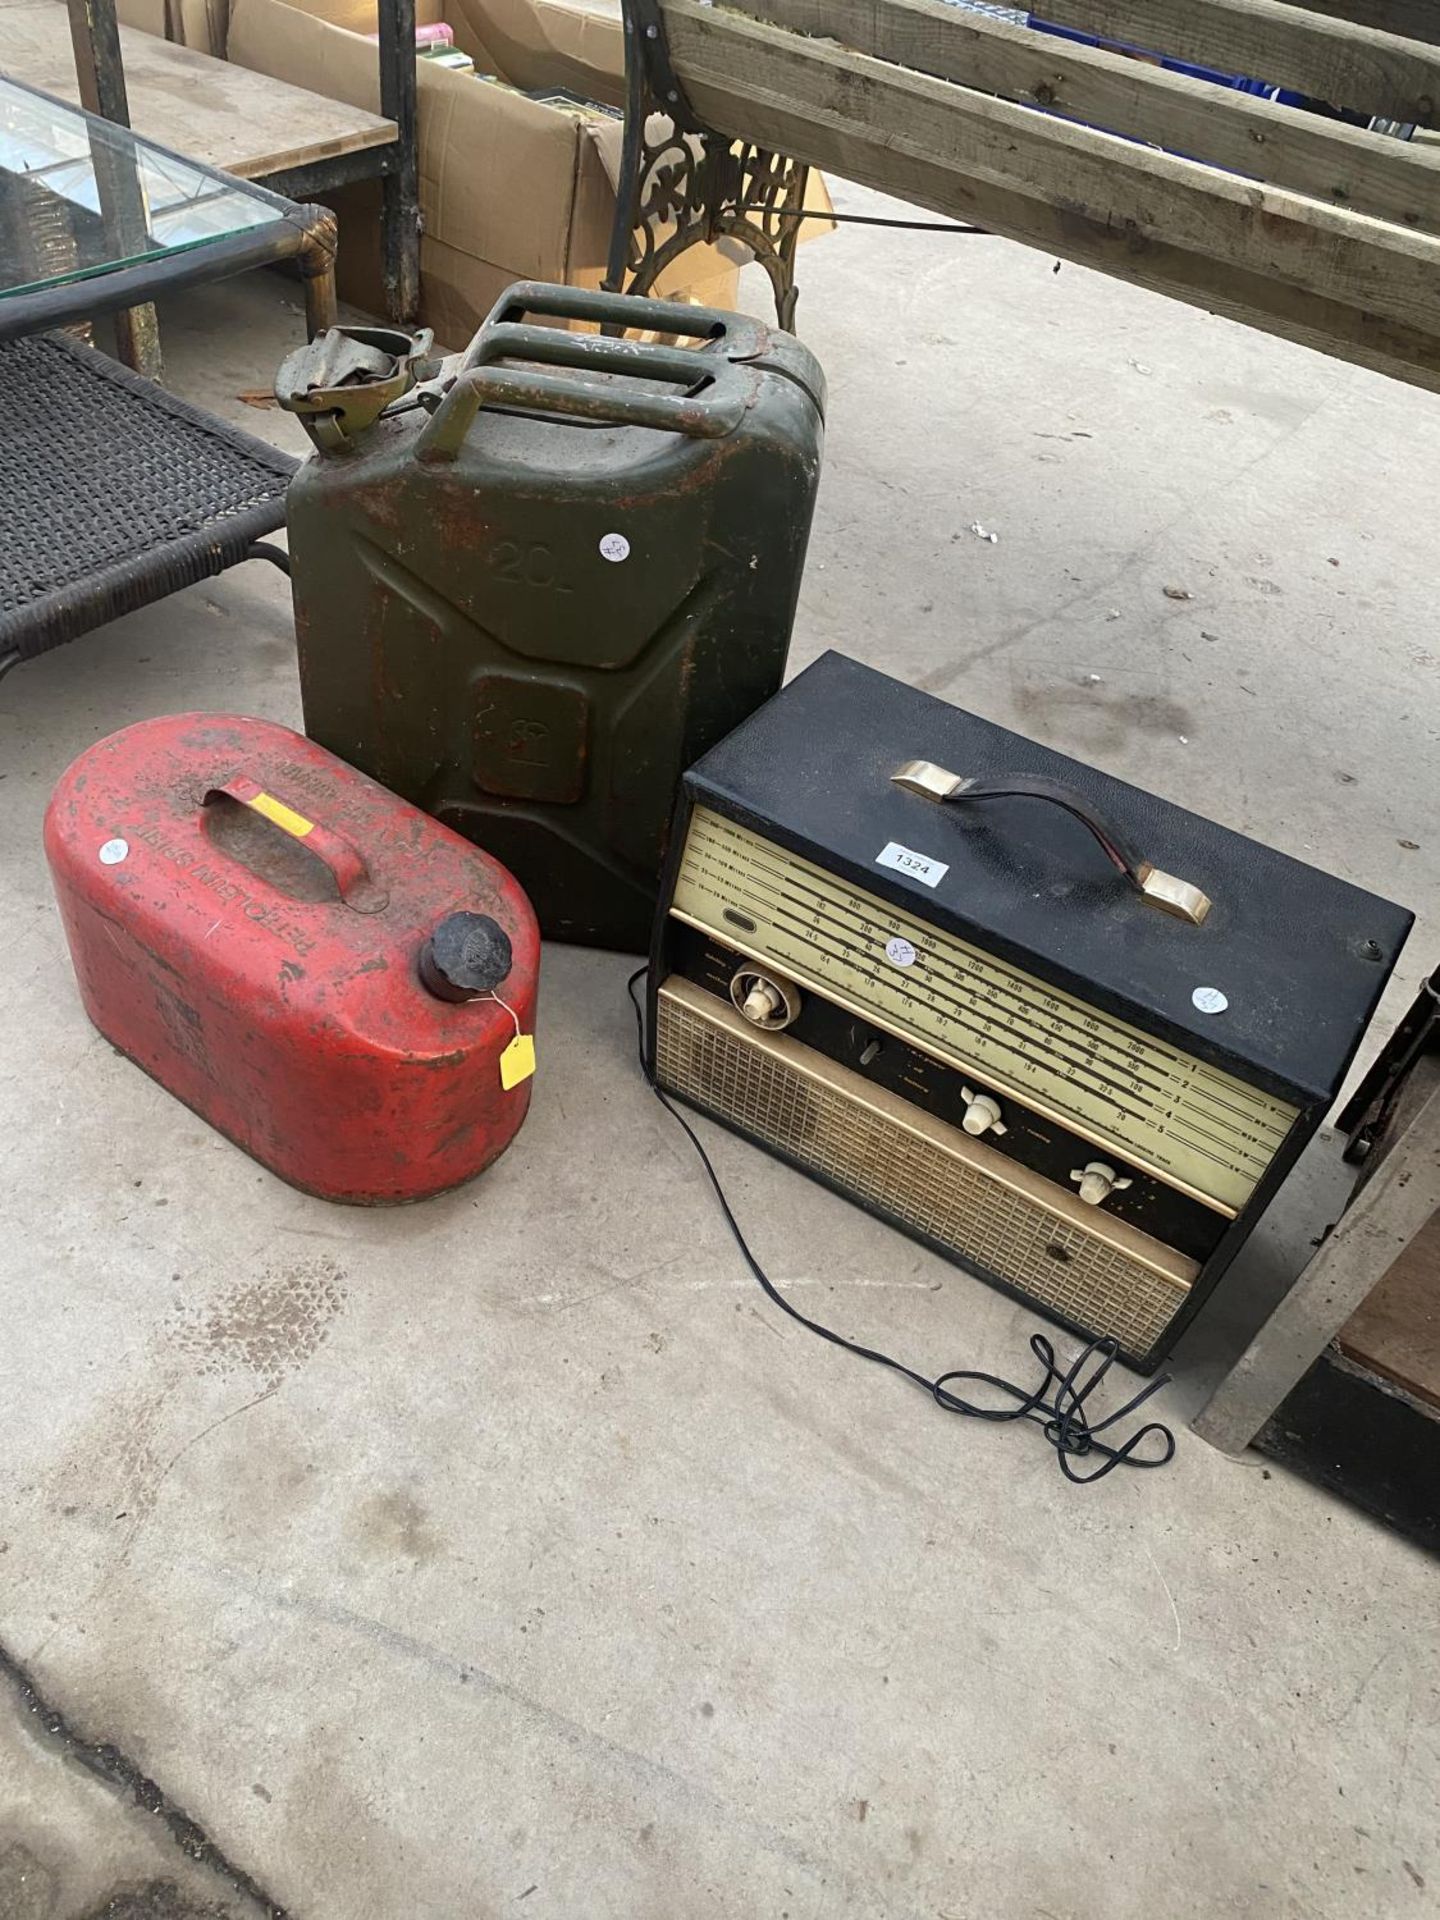 A VINTAGE PYE RADIO, A VINTAGE PETROLEUM SPIRIT FUEL CAN AND A FURTHER JERRY CAN